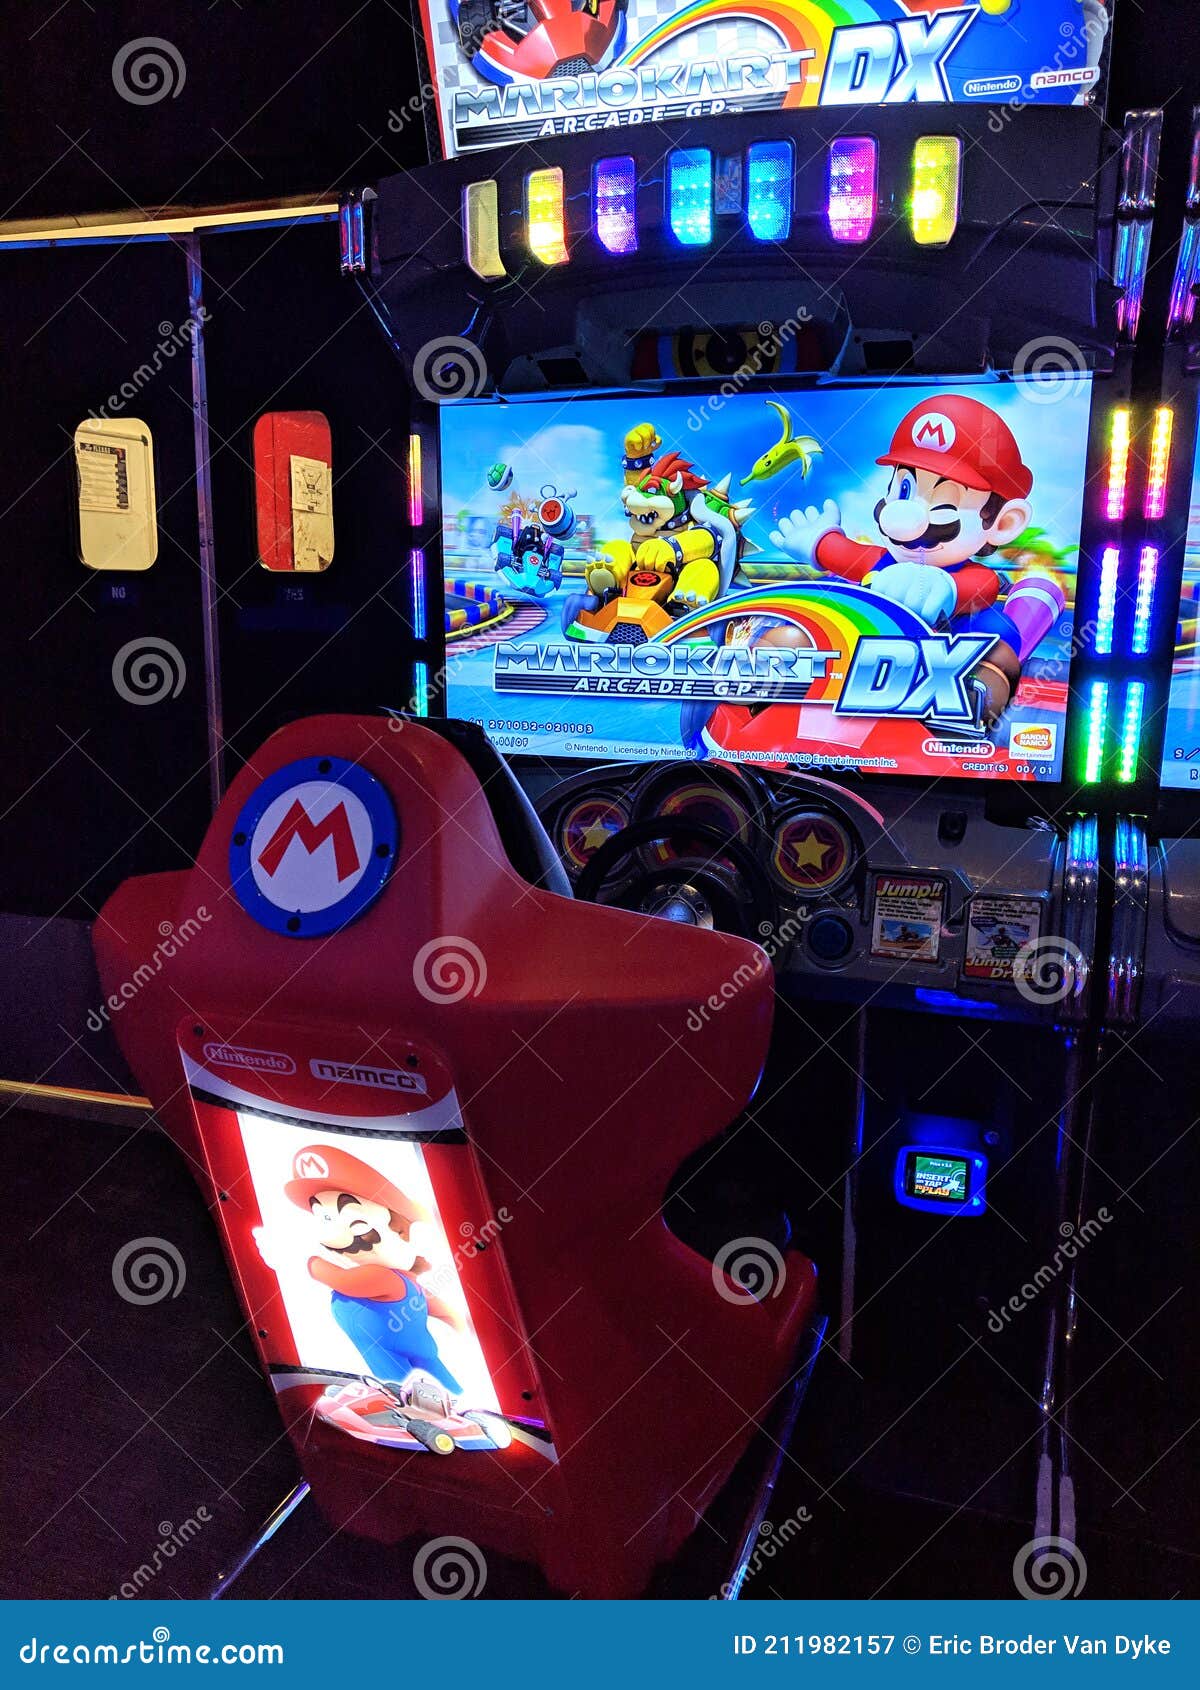 Mario Kart Arcade GP DX Cabinet Unit on for Play at Lucky Strike